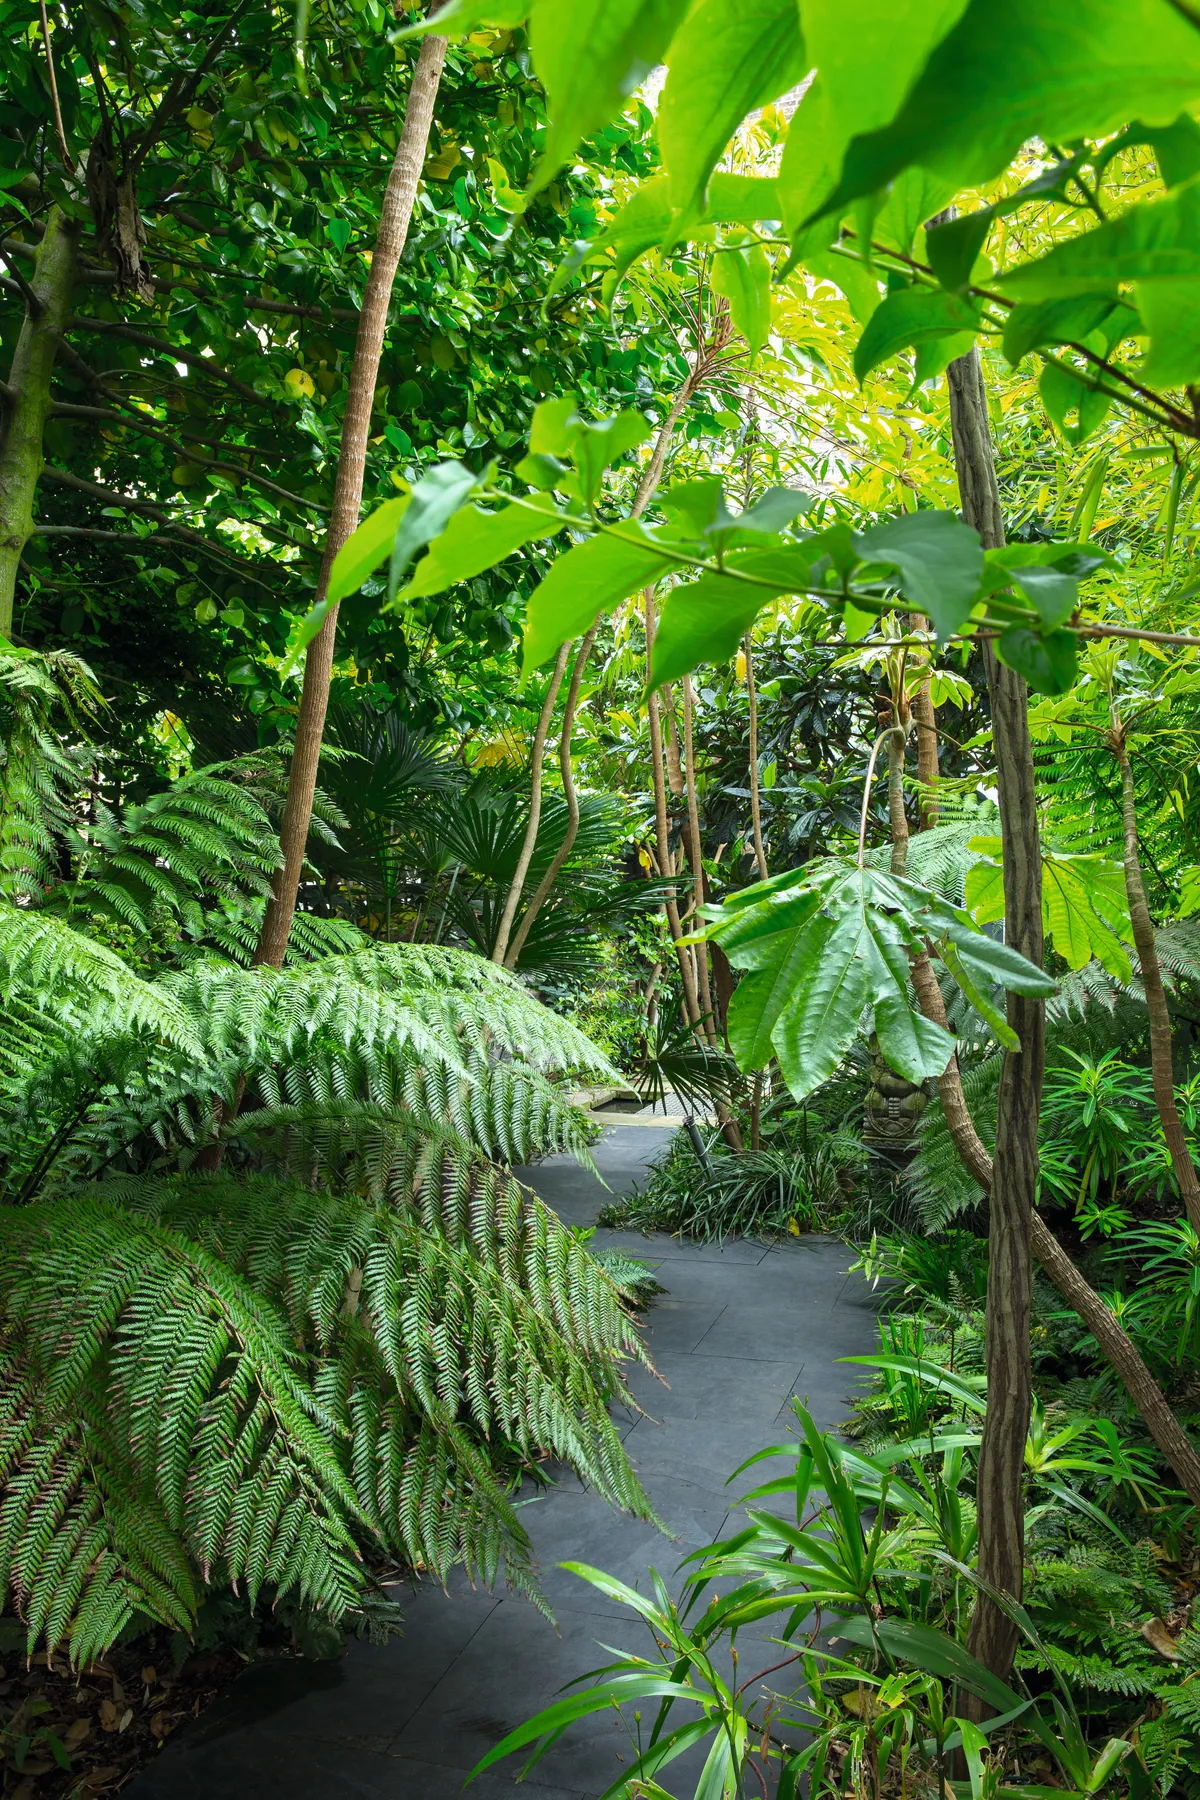 An urban garden pathway with exotic plants and large green leaves